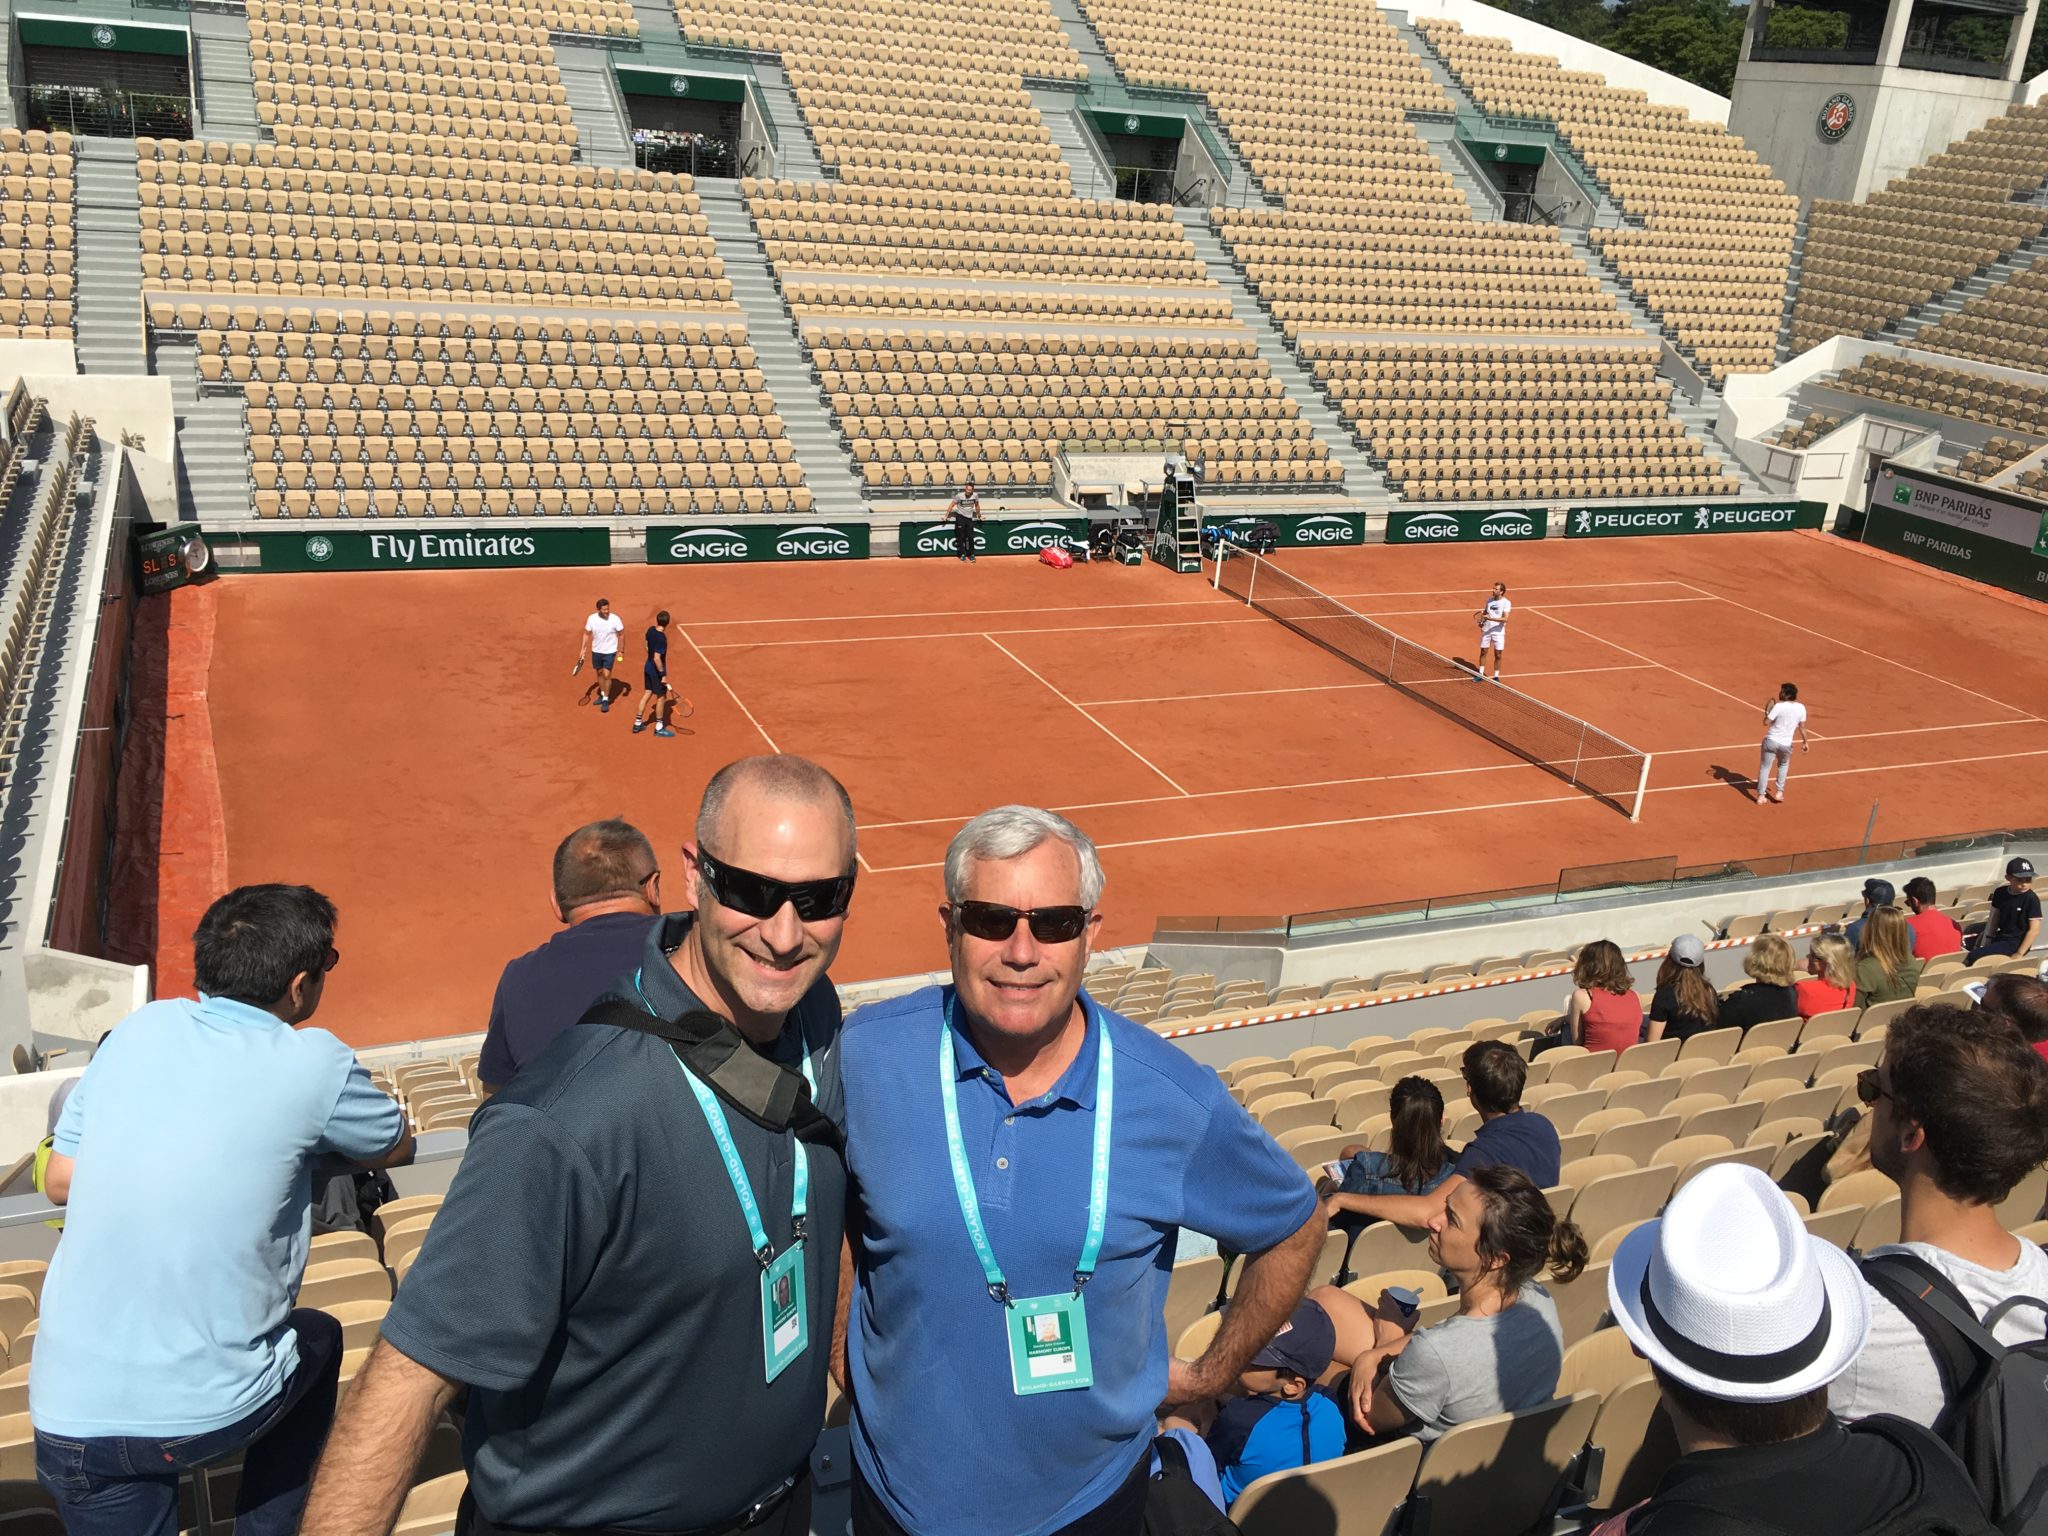 Harmony SmartPacks are a smash at the French Open